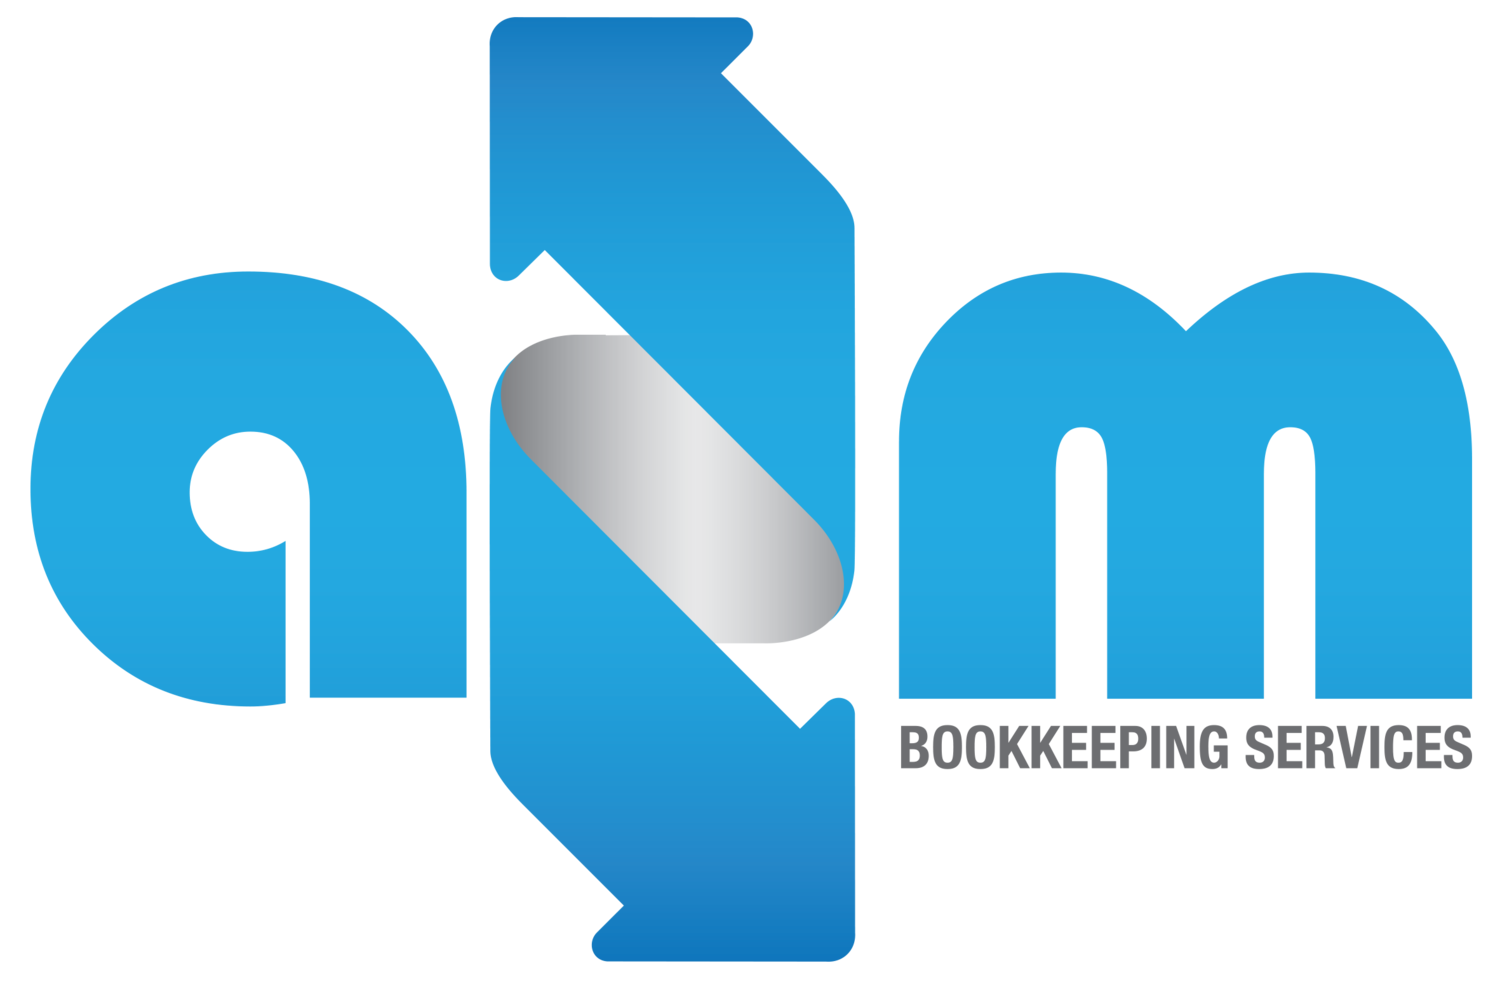 Aim Bookkeeping Services